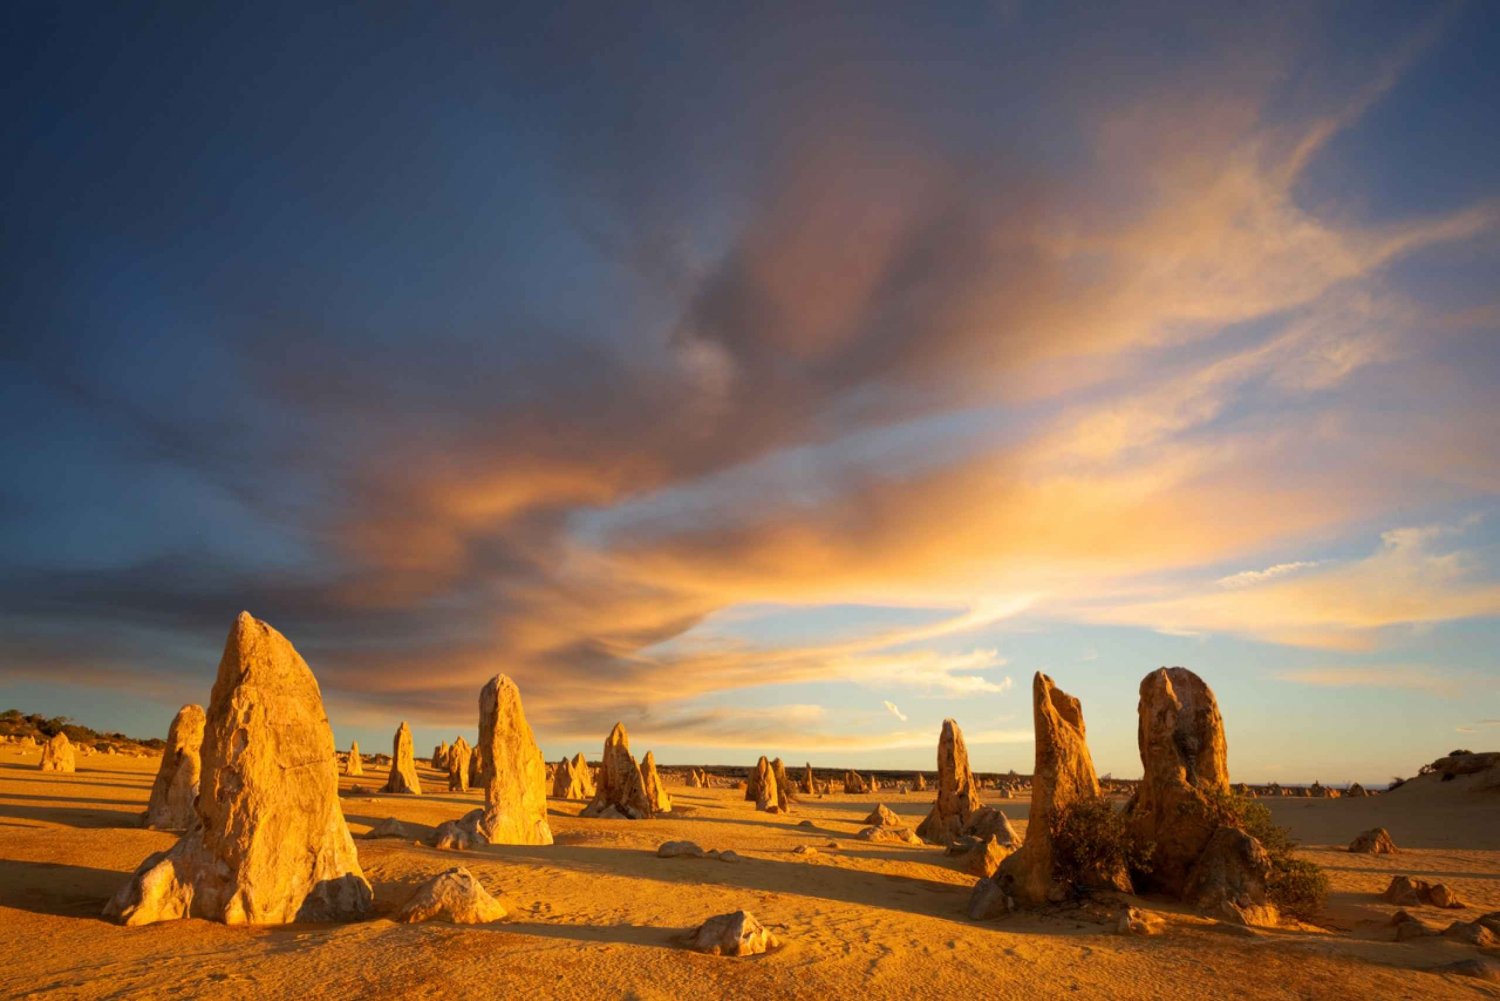 Western Australia’s Paradise: A Private Day Tour from Perth